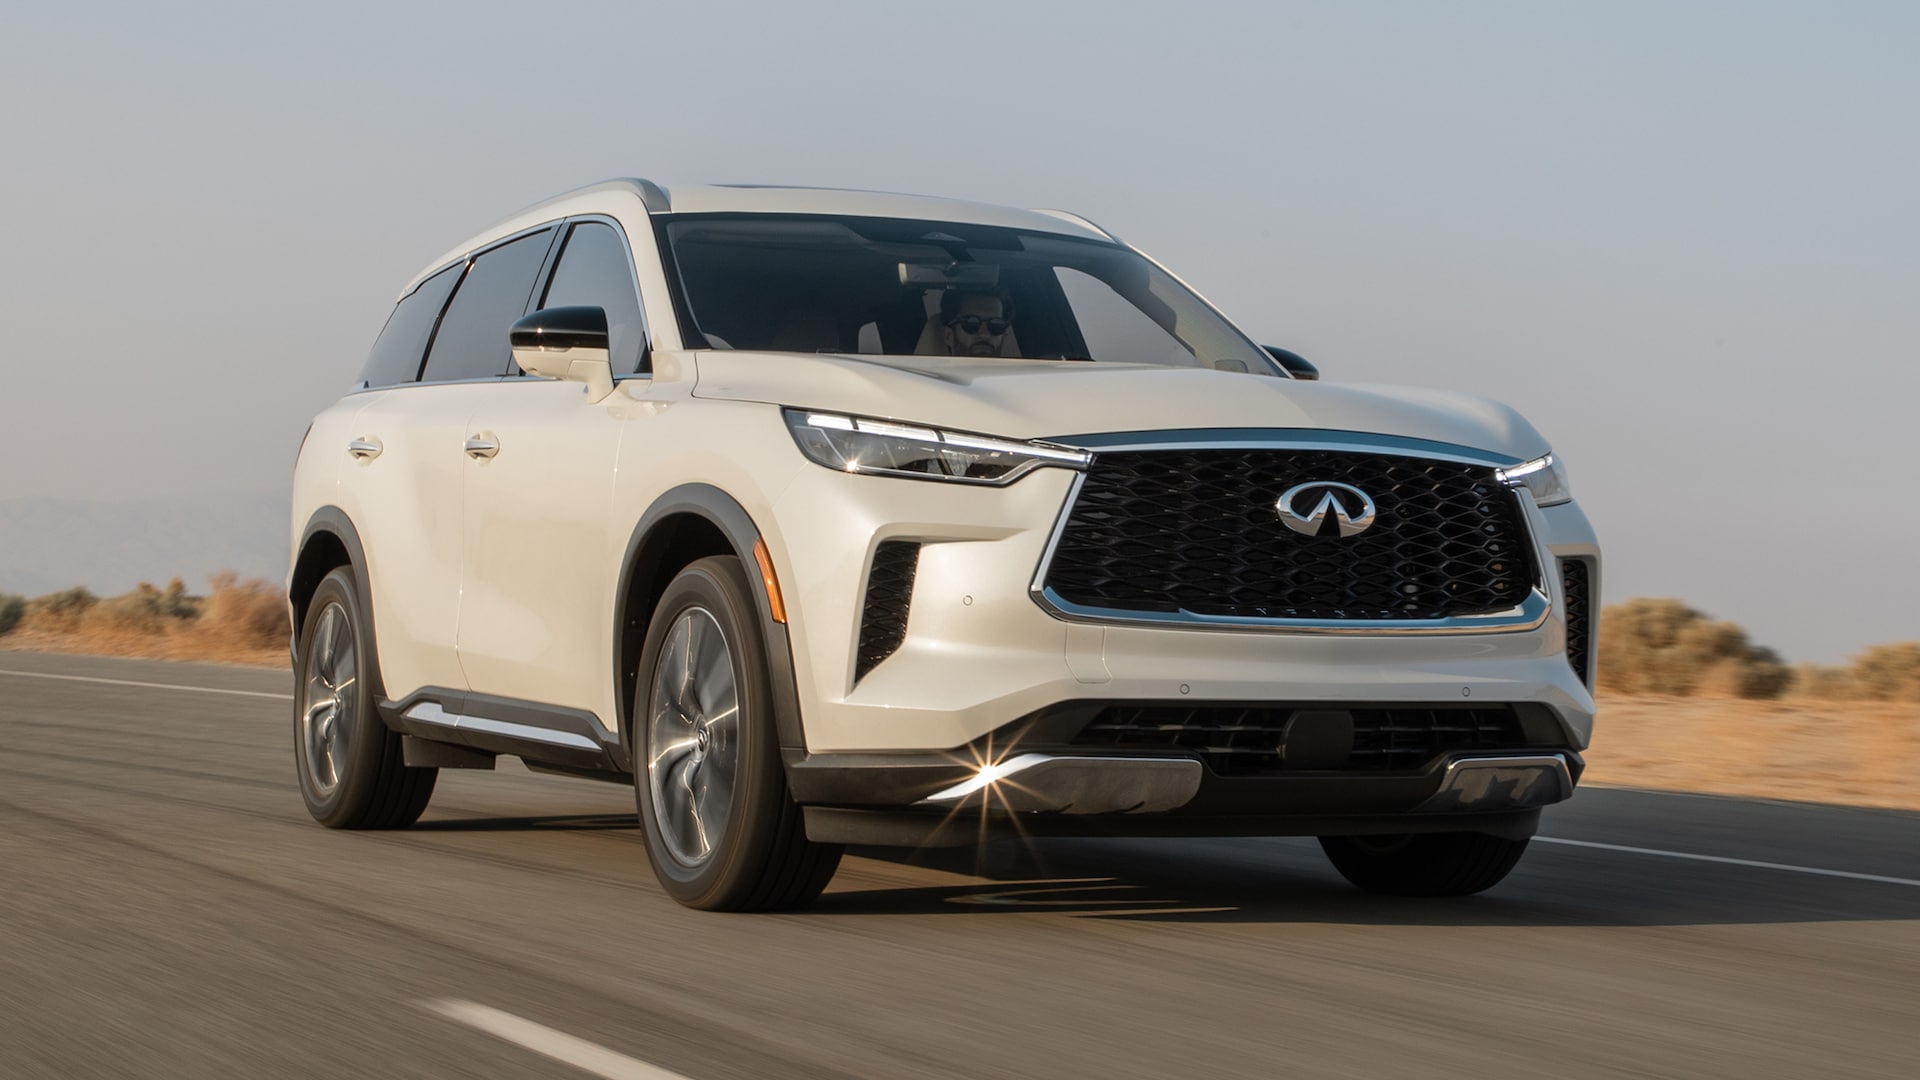 2022 Infiniti QX60 Pros and Cons Review: Three-Row Luxury